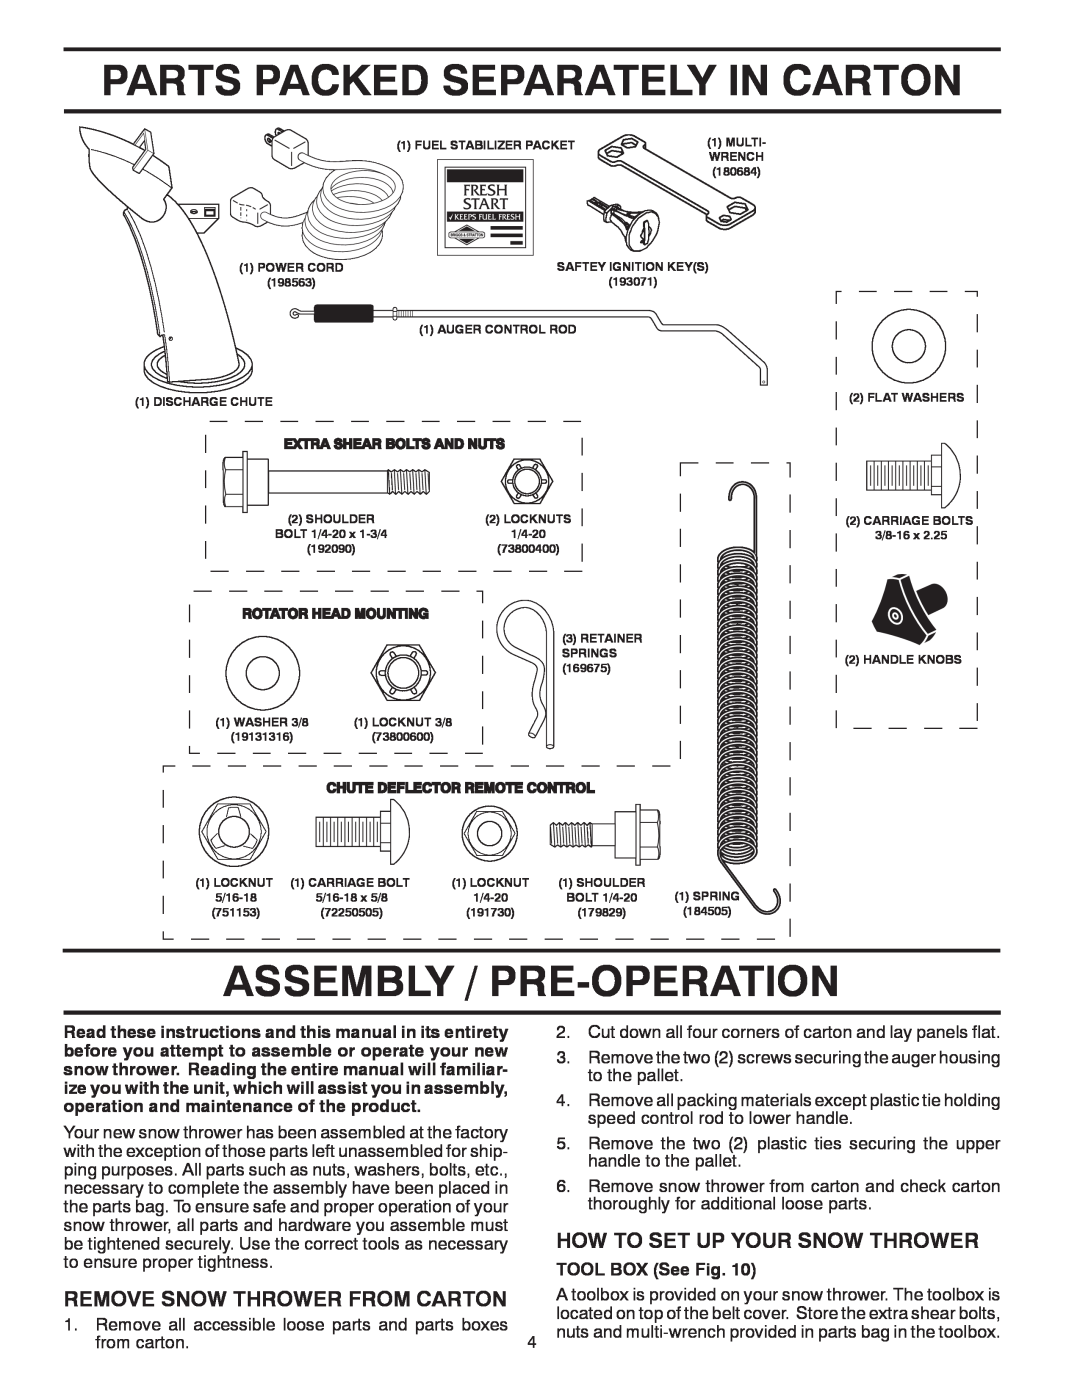 Poulan PP1150E30 owner manual Parts Packed Separately In Carton, Assembly / Pre-Operation, How To Set Up Your Snow Thrower 